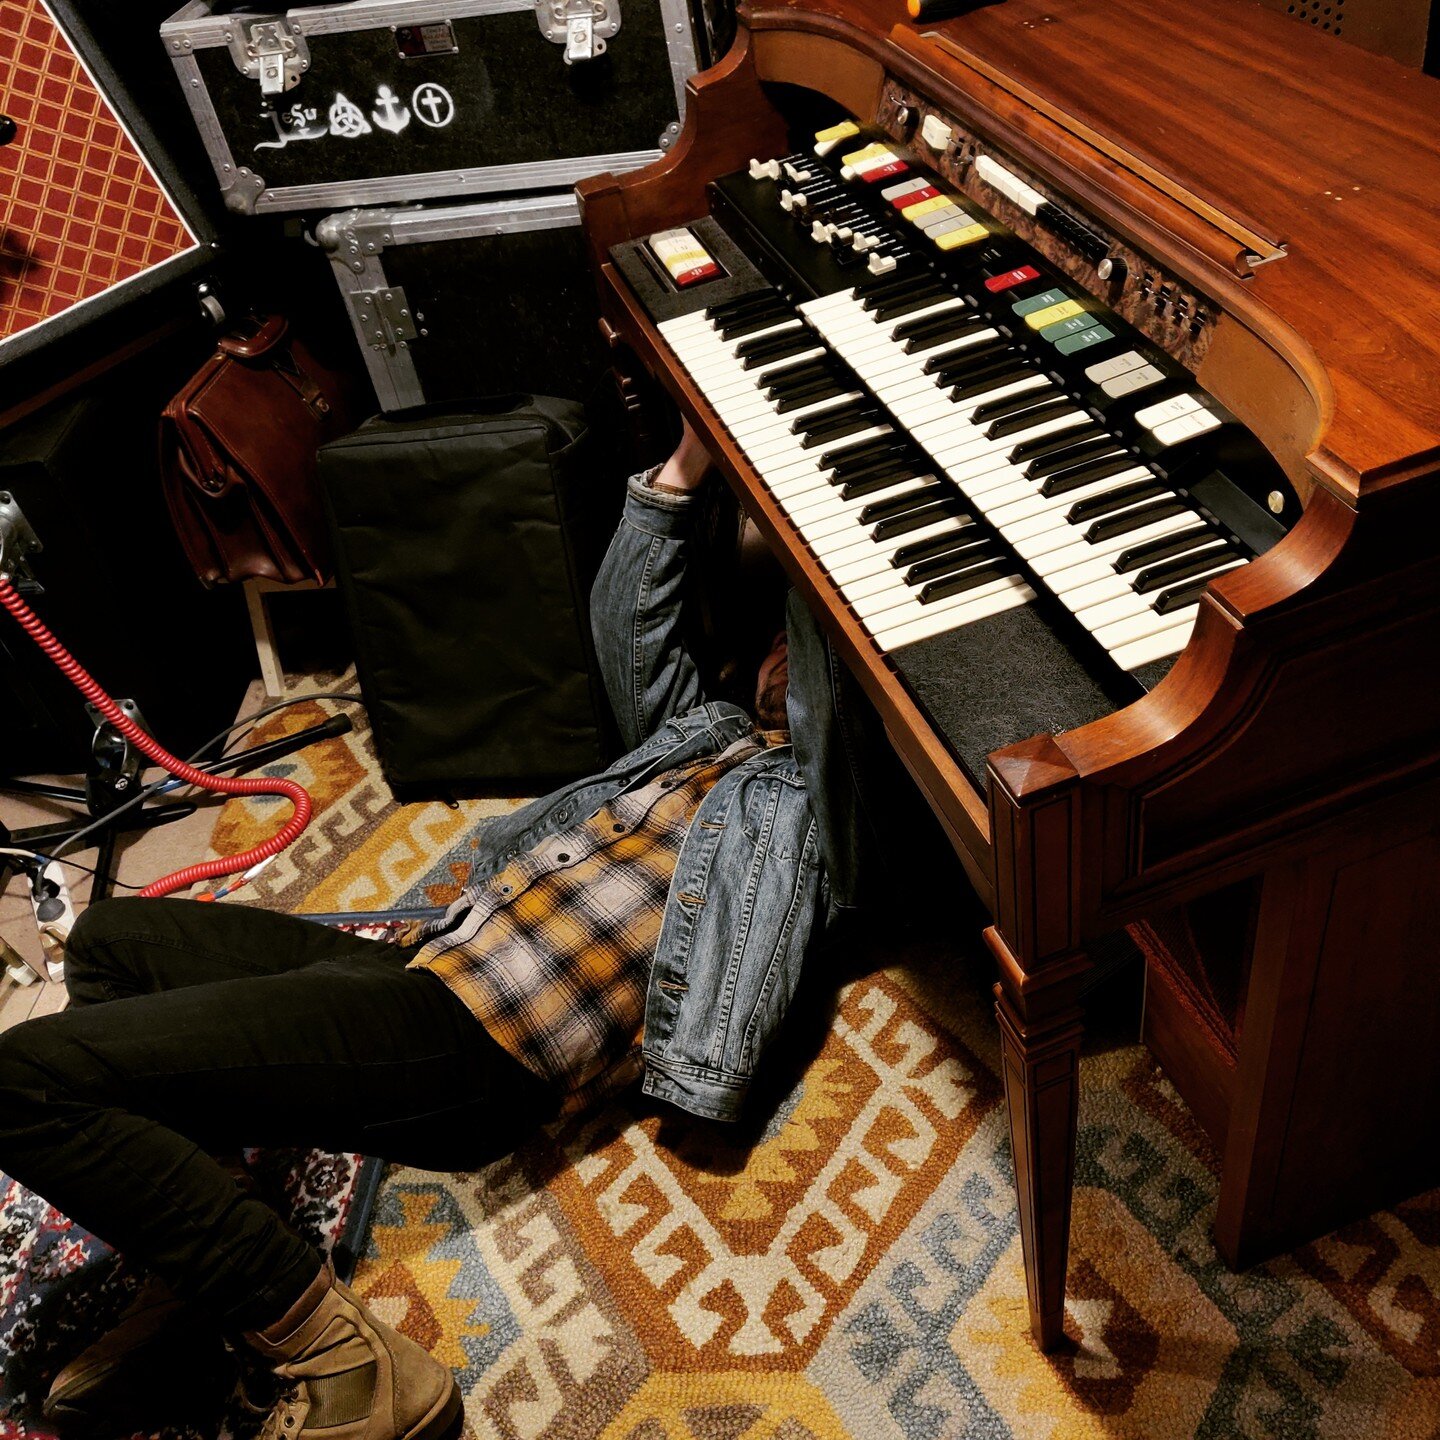 First time working on a Hammond!!
.
This is T-500 series Hammond Organ with an inbuilt Leslie. Even though its runs a Solid State Amplifier, it was the last model to include a tone wheel generator (I believe) operated with those classic drawbars and 